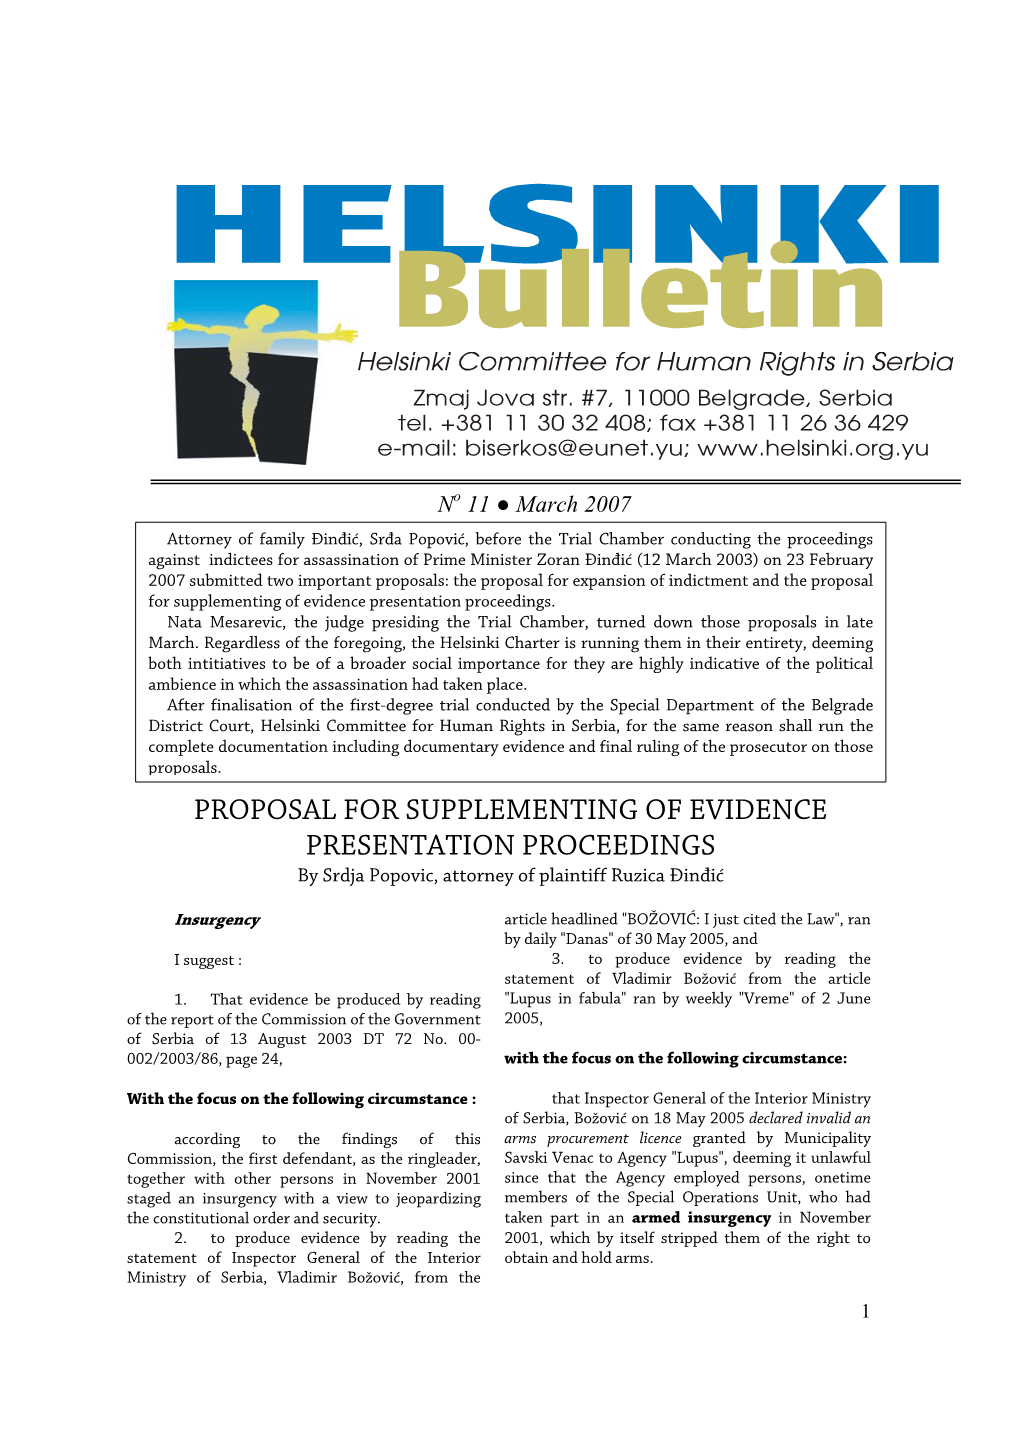 Proposal for Supplementing of Evidence Presentation Proceedings